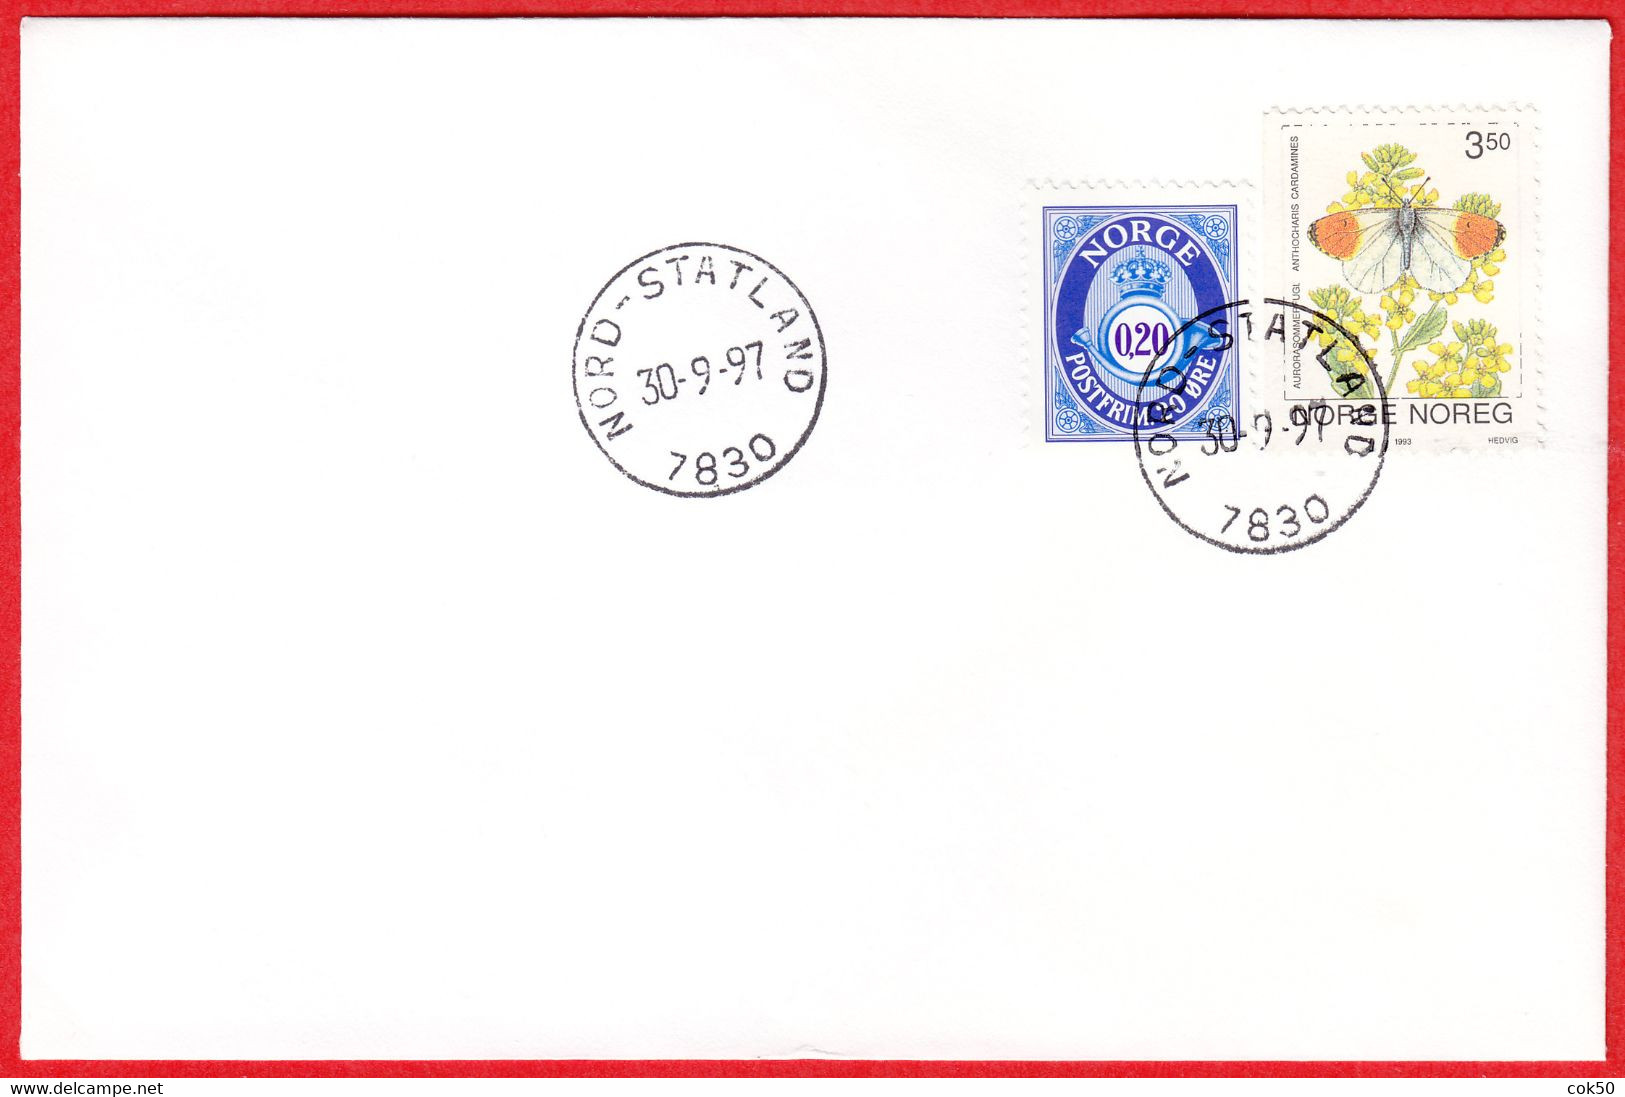 NORWAY -  7830 NORD-STATLAND (Trøndelag County) - Last Day/postoffice Closed On 1997.09.30 - Local Post Stamps